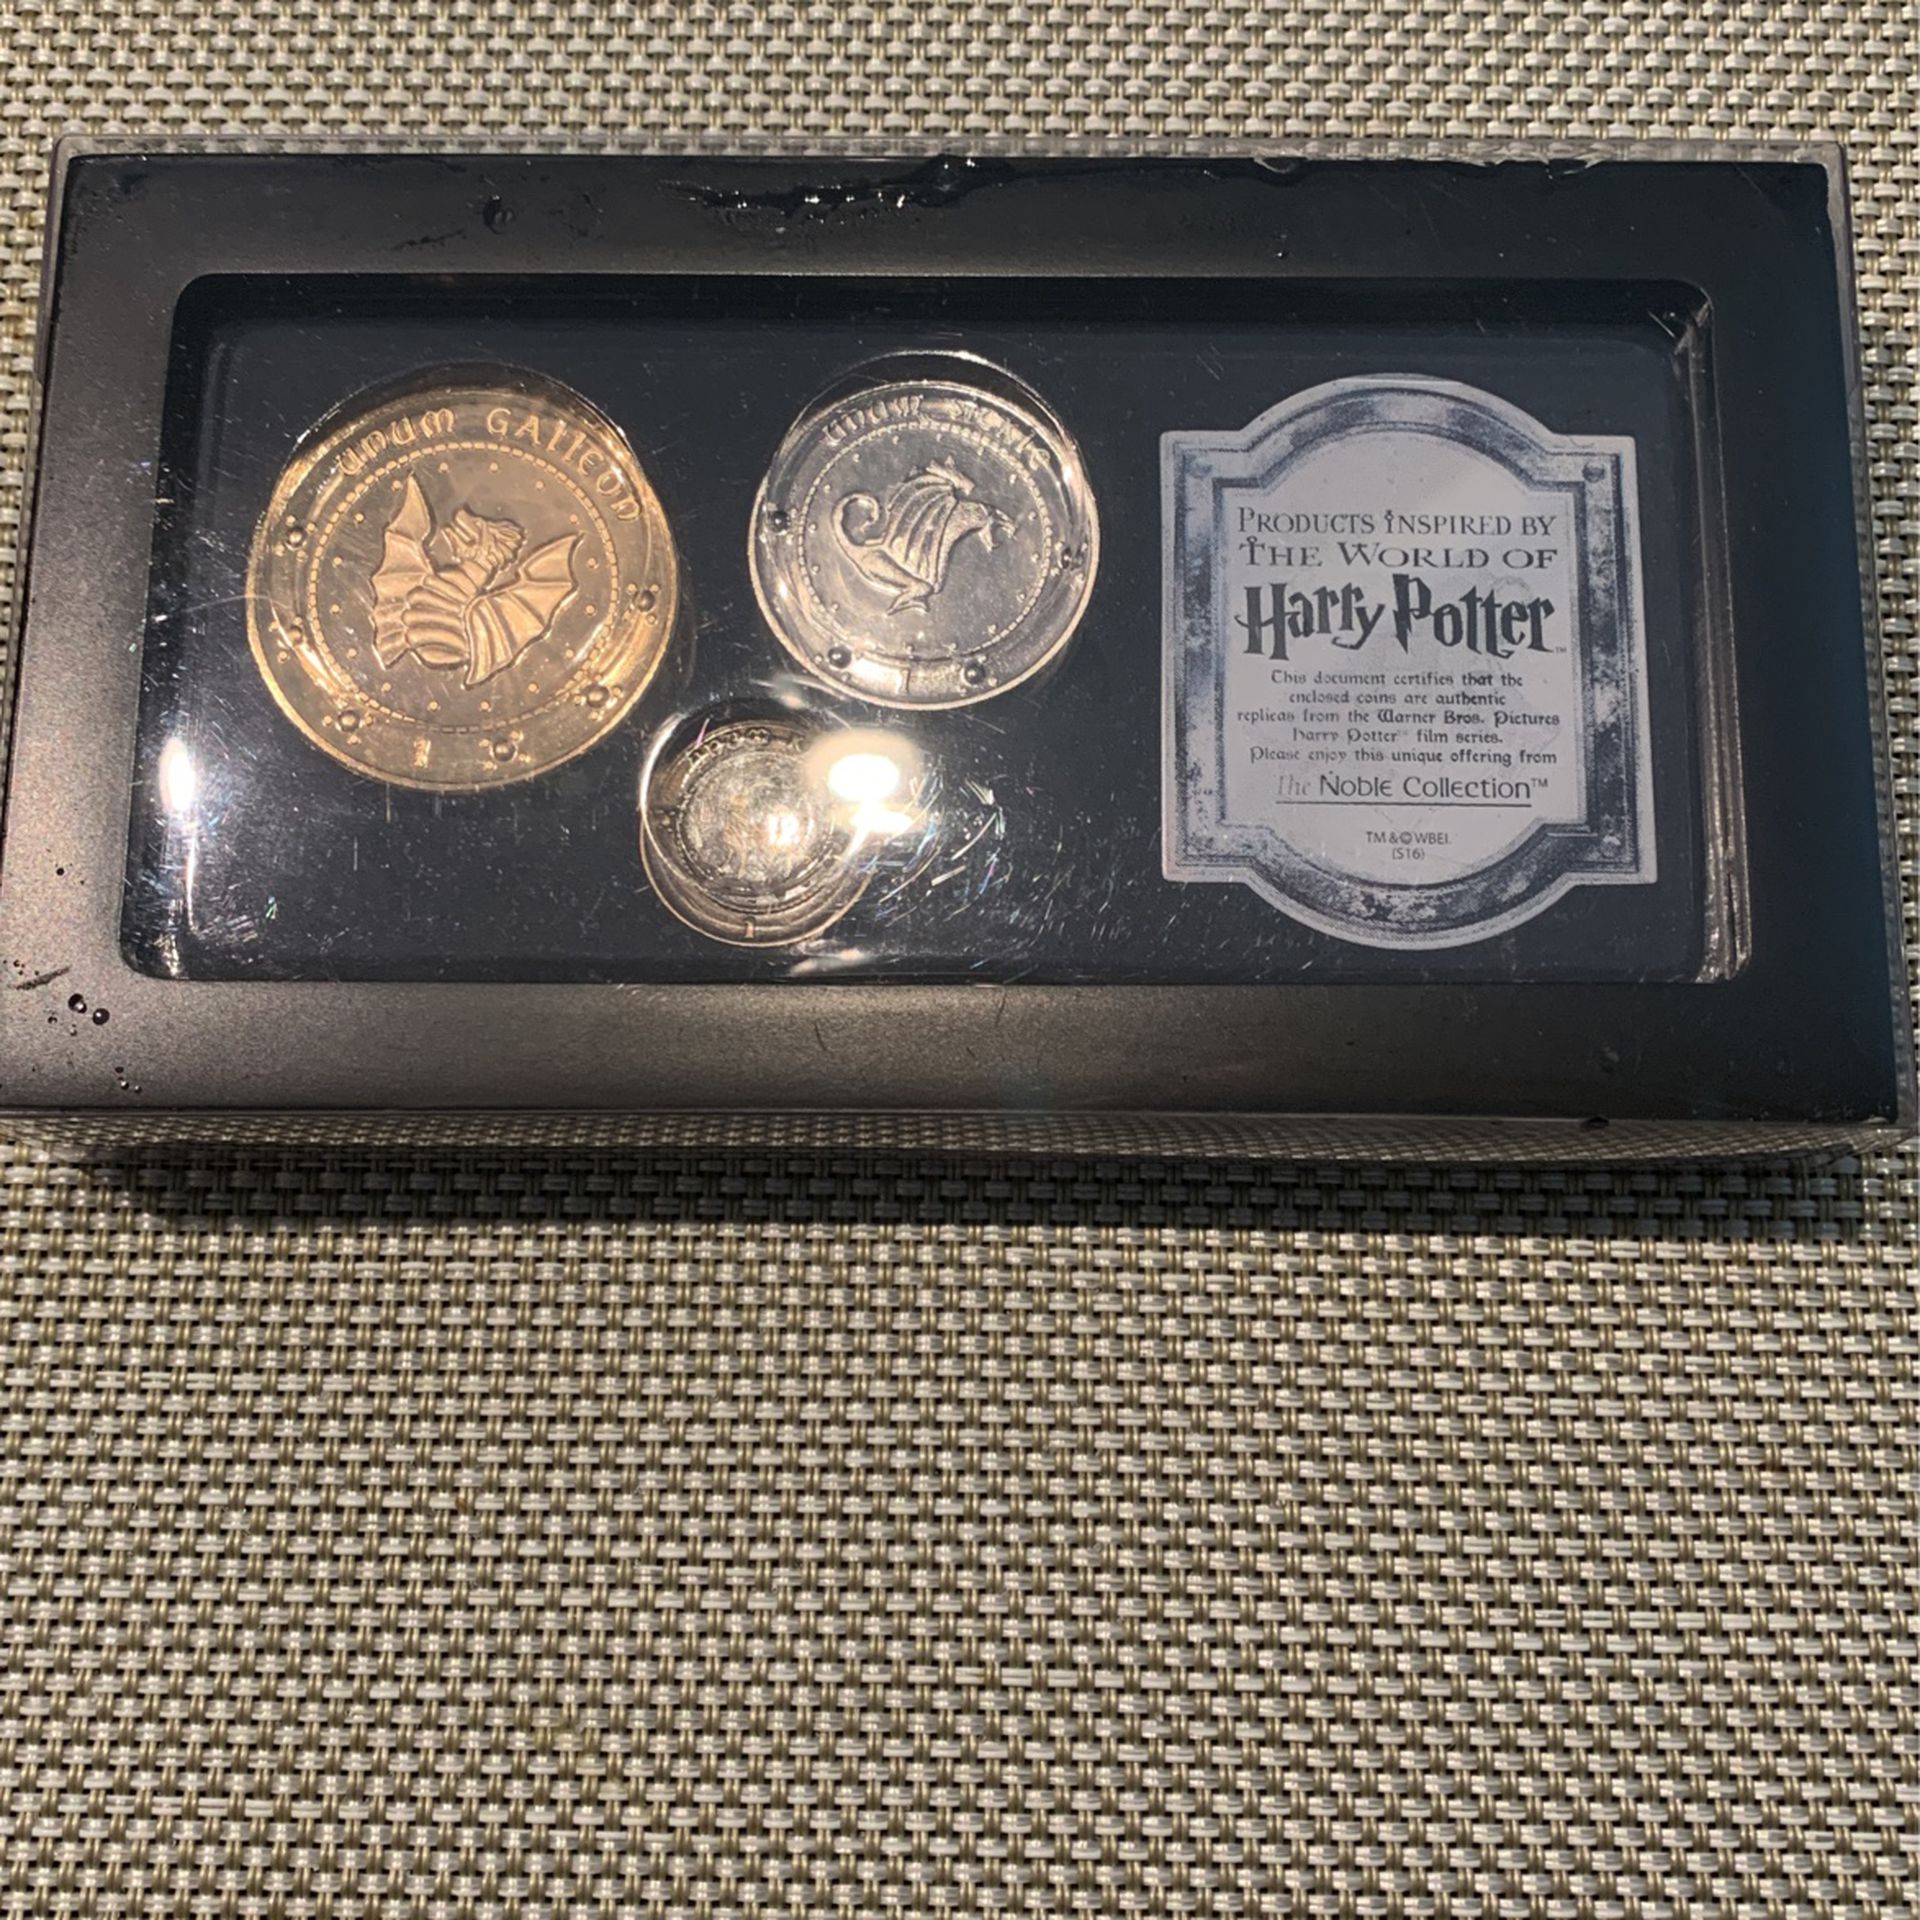 Brand New Harry Potter Collection Coins 